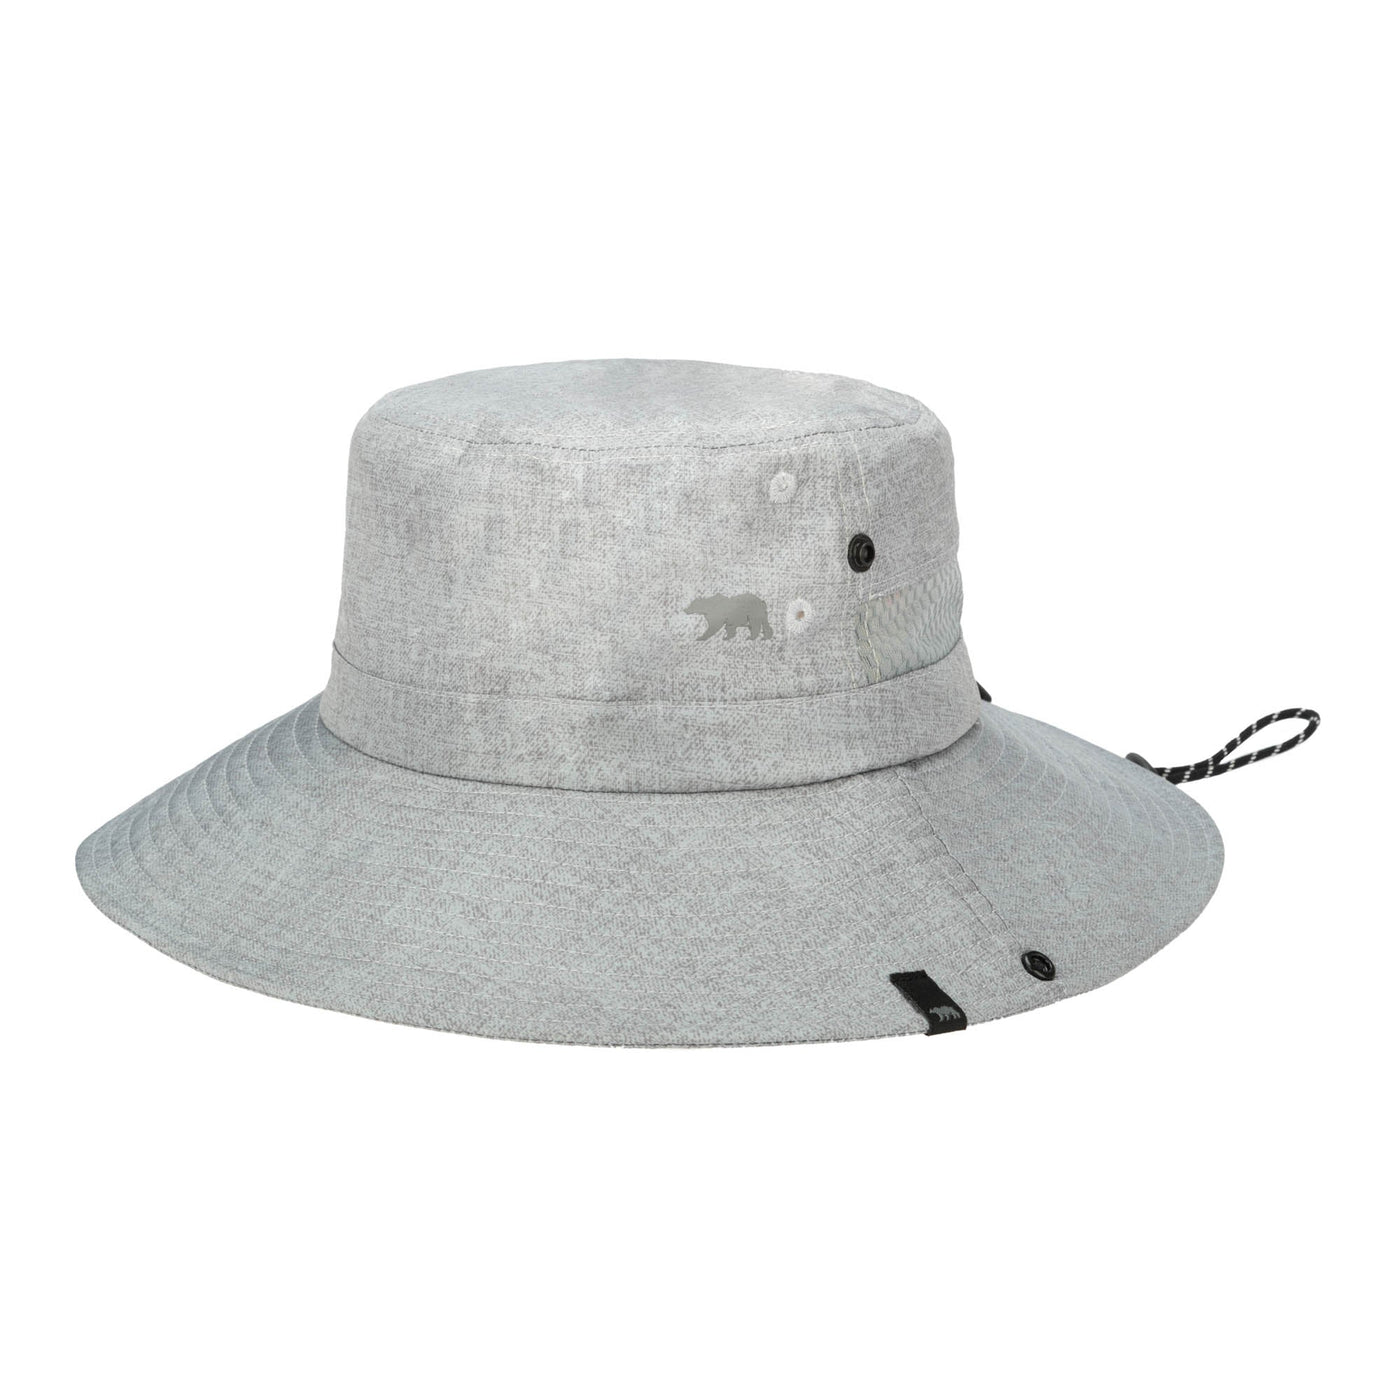 Diego Hat Company and – Flap Outdoor Hat Cord San Boonie Adjustable with Neck Chin